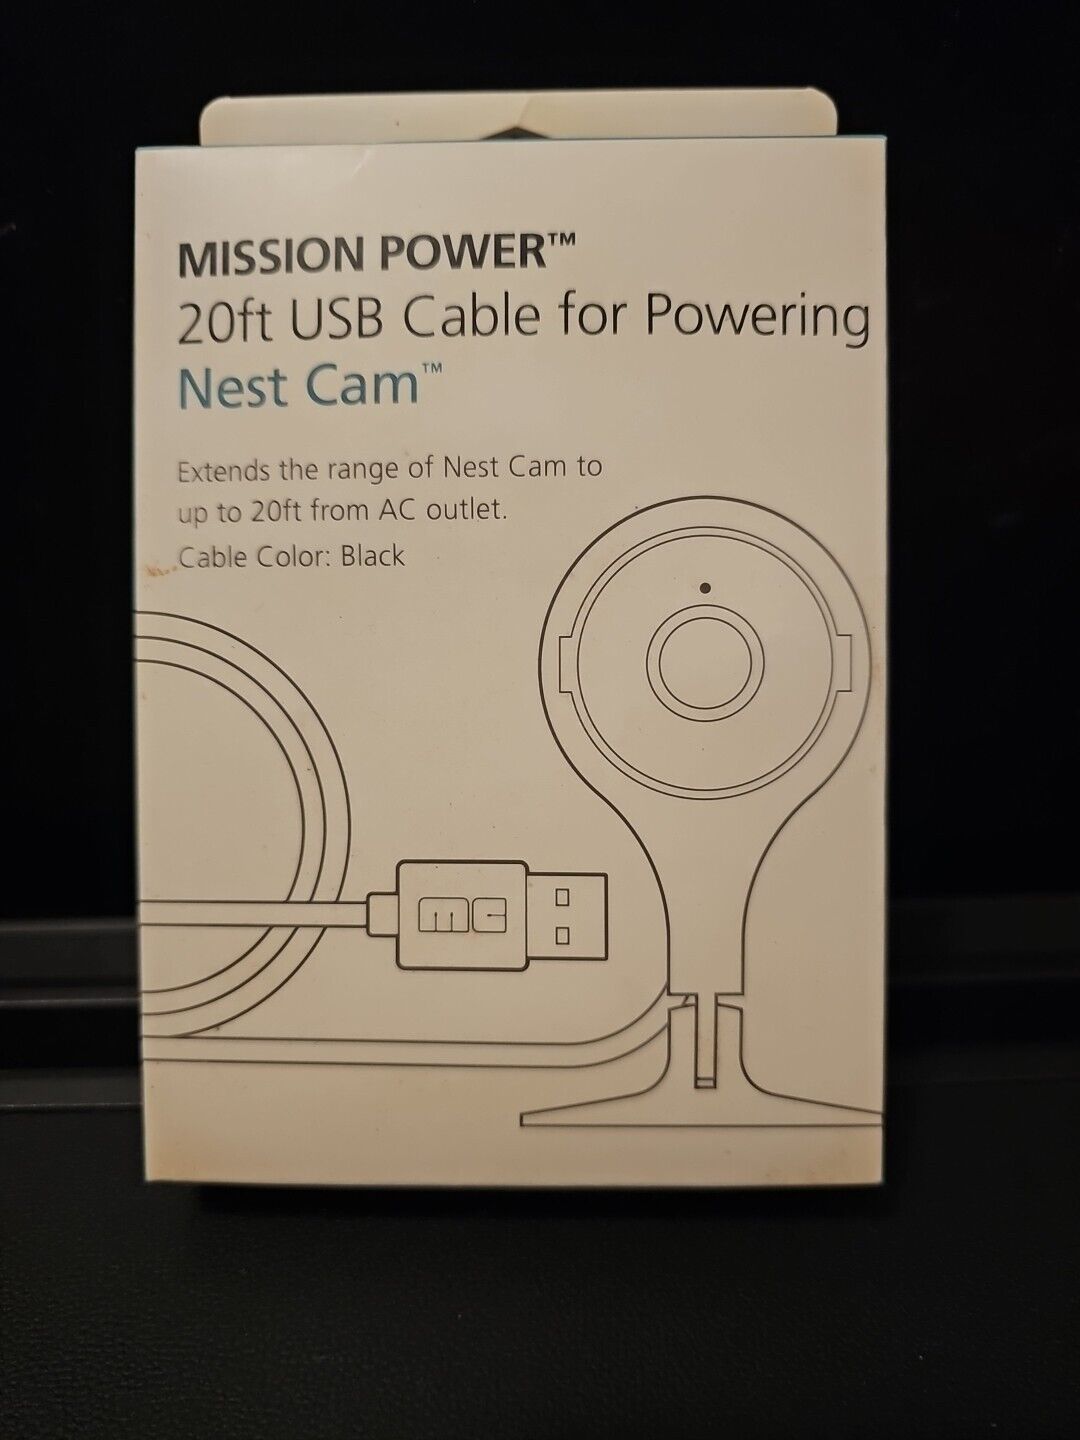 Mission Power 20ft USB Cable for Powering Nest Cam